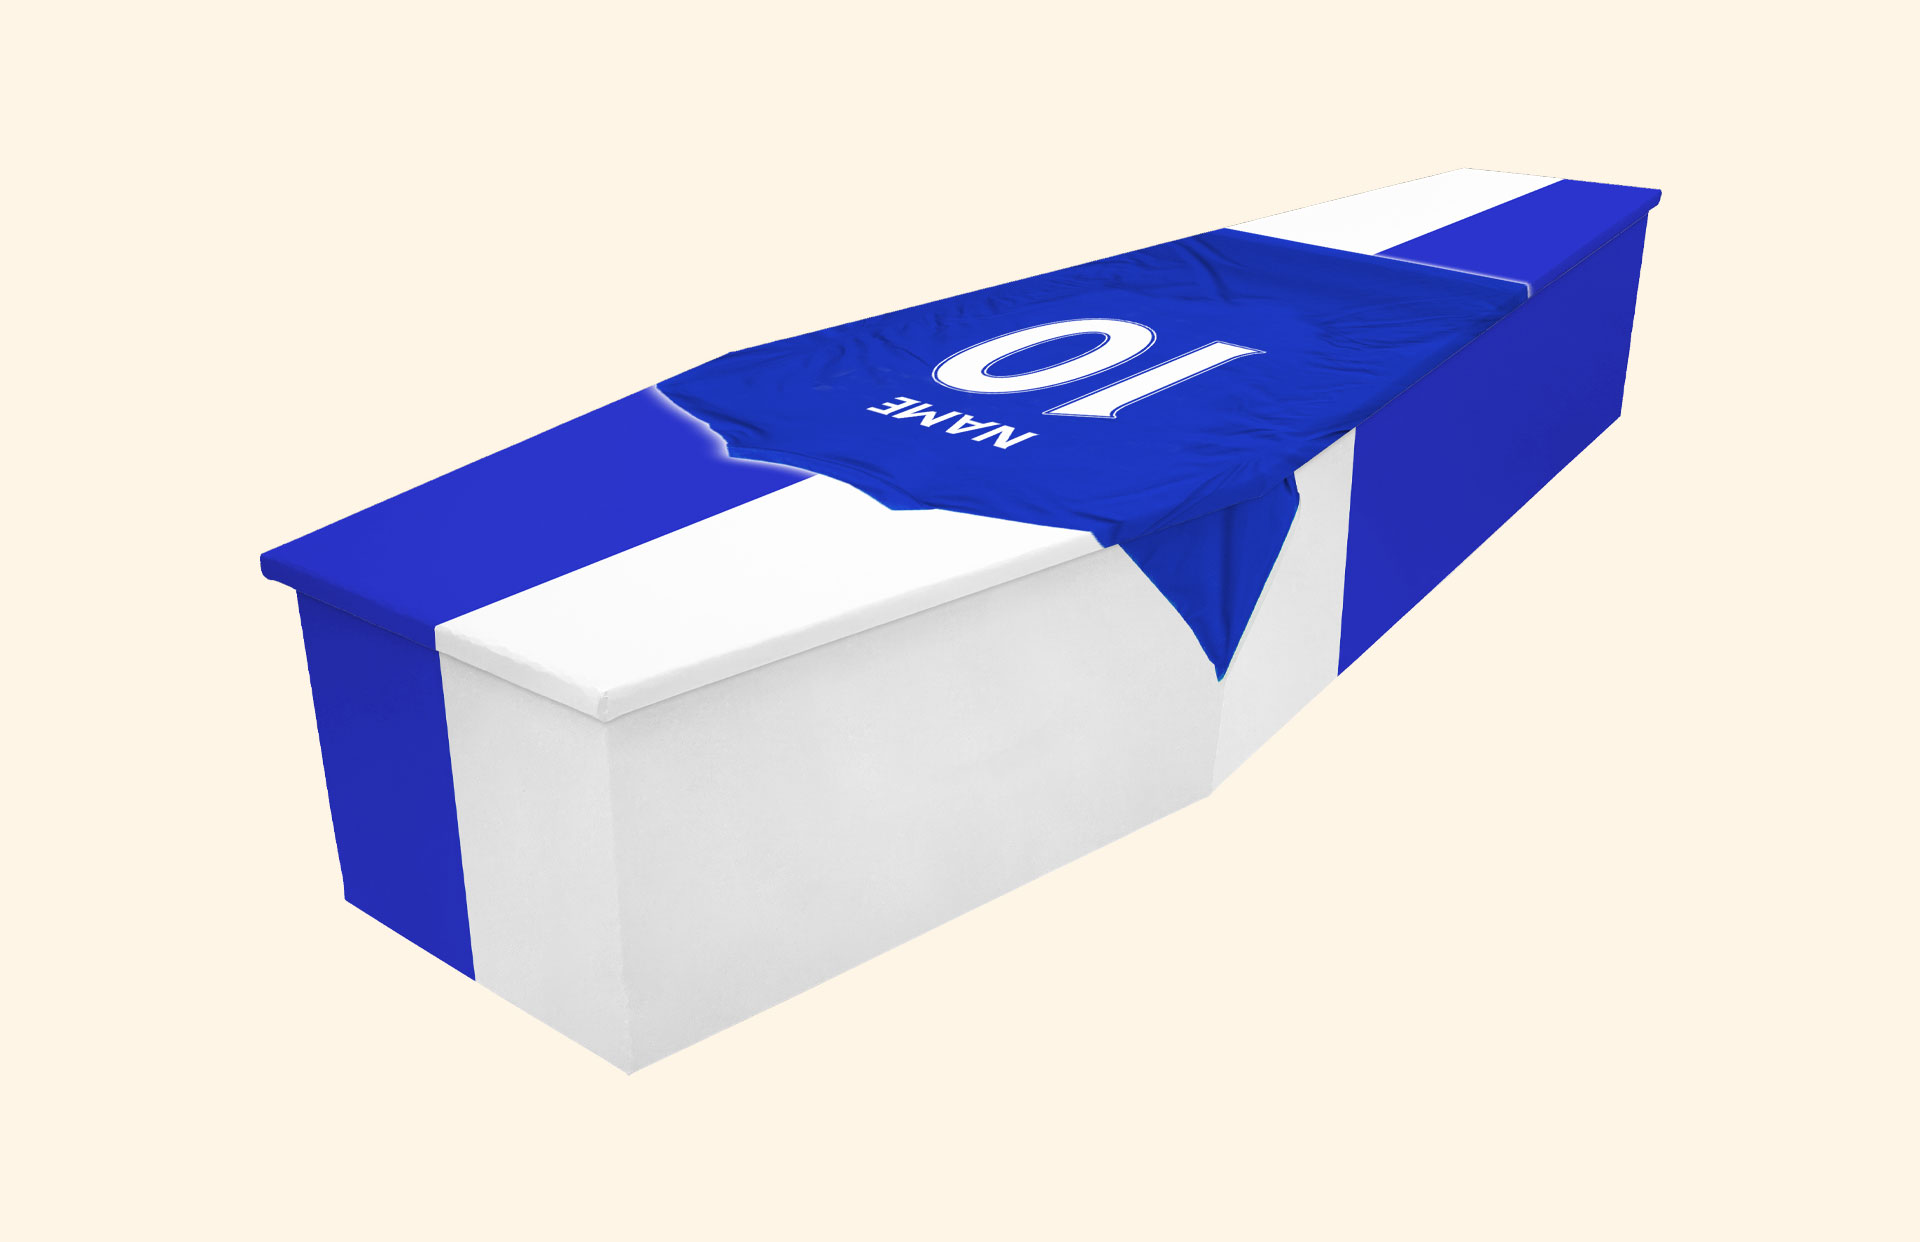 Blue and White design on a cardboard coffin